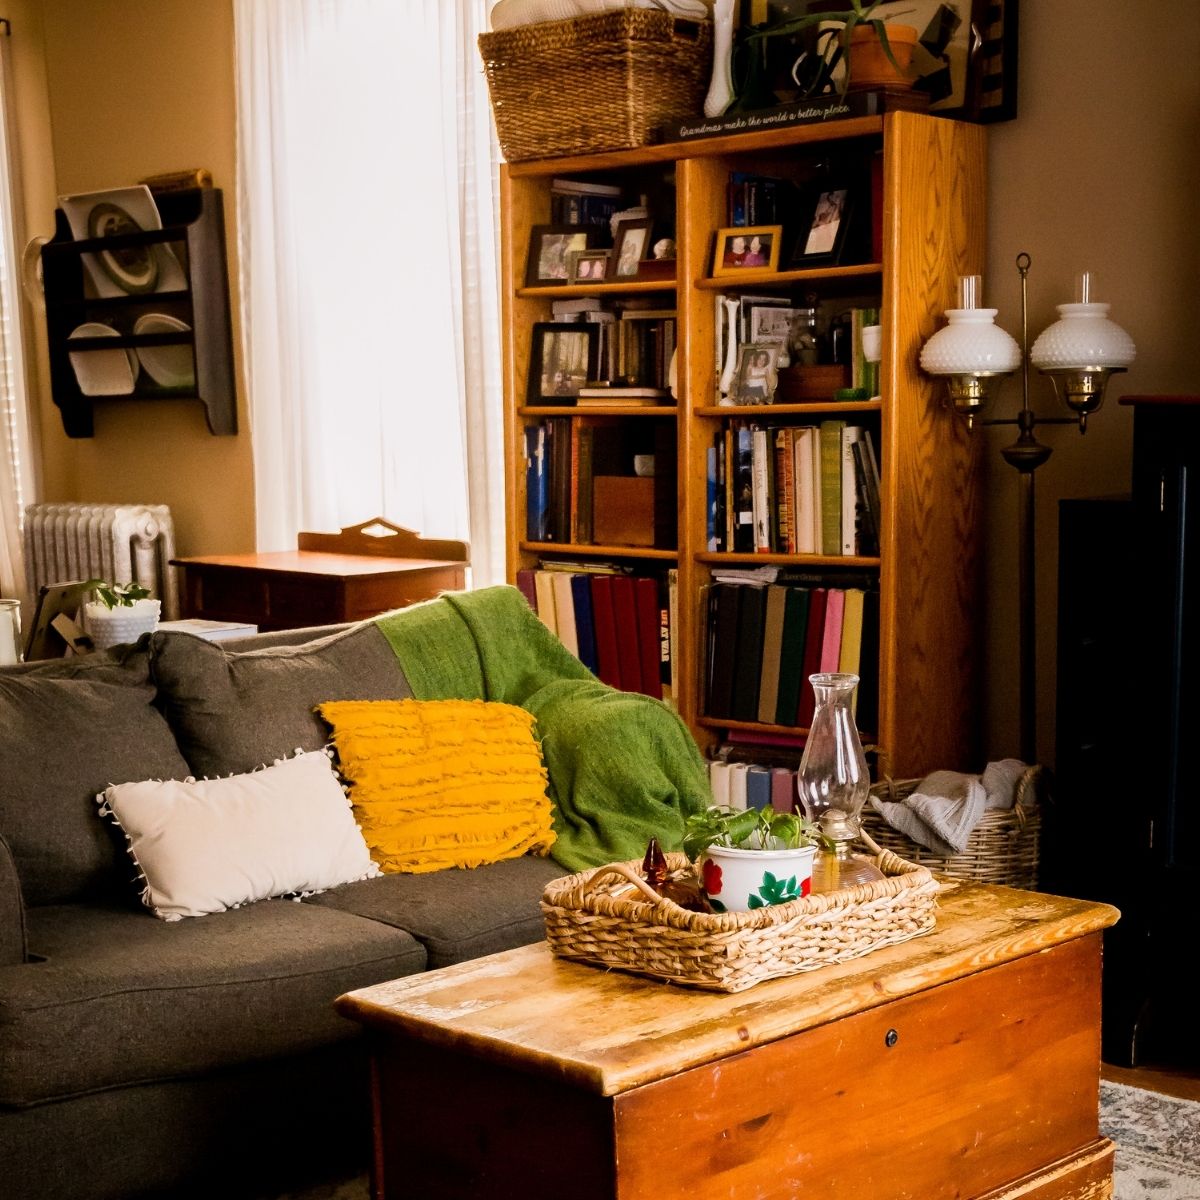 sharing tips for maintaining a clean home starting with a cozy living room